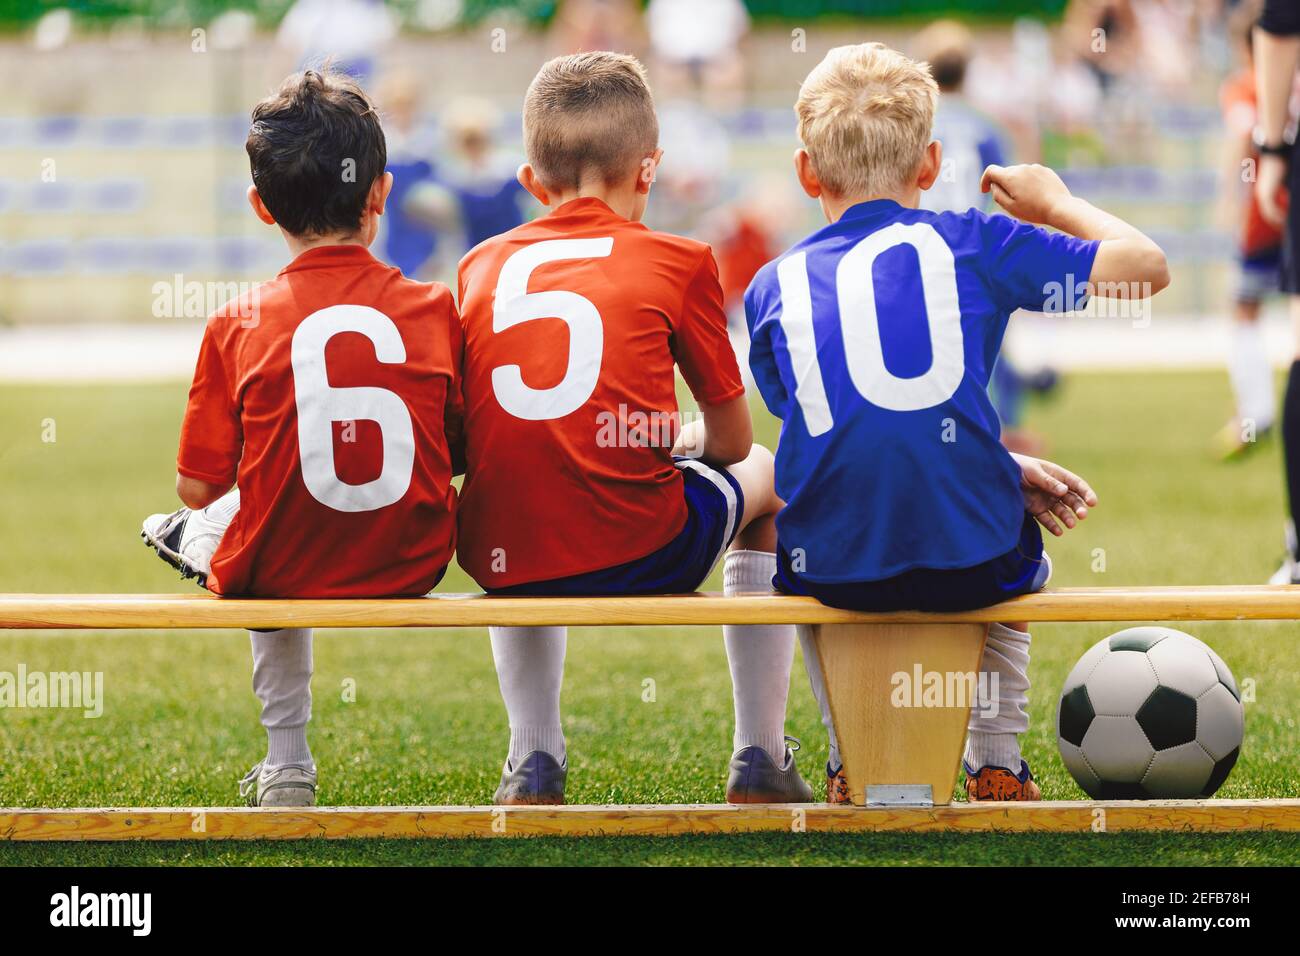 Children in Sports Team. Happy Kids in Sportswear with Ball Sitting on Soccer Football Bench. School Boys Play Sports on Grass Pitch Stadium. Stock Photo